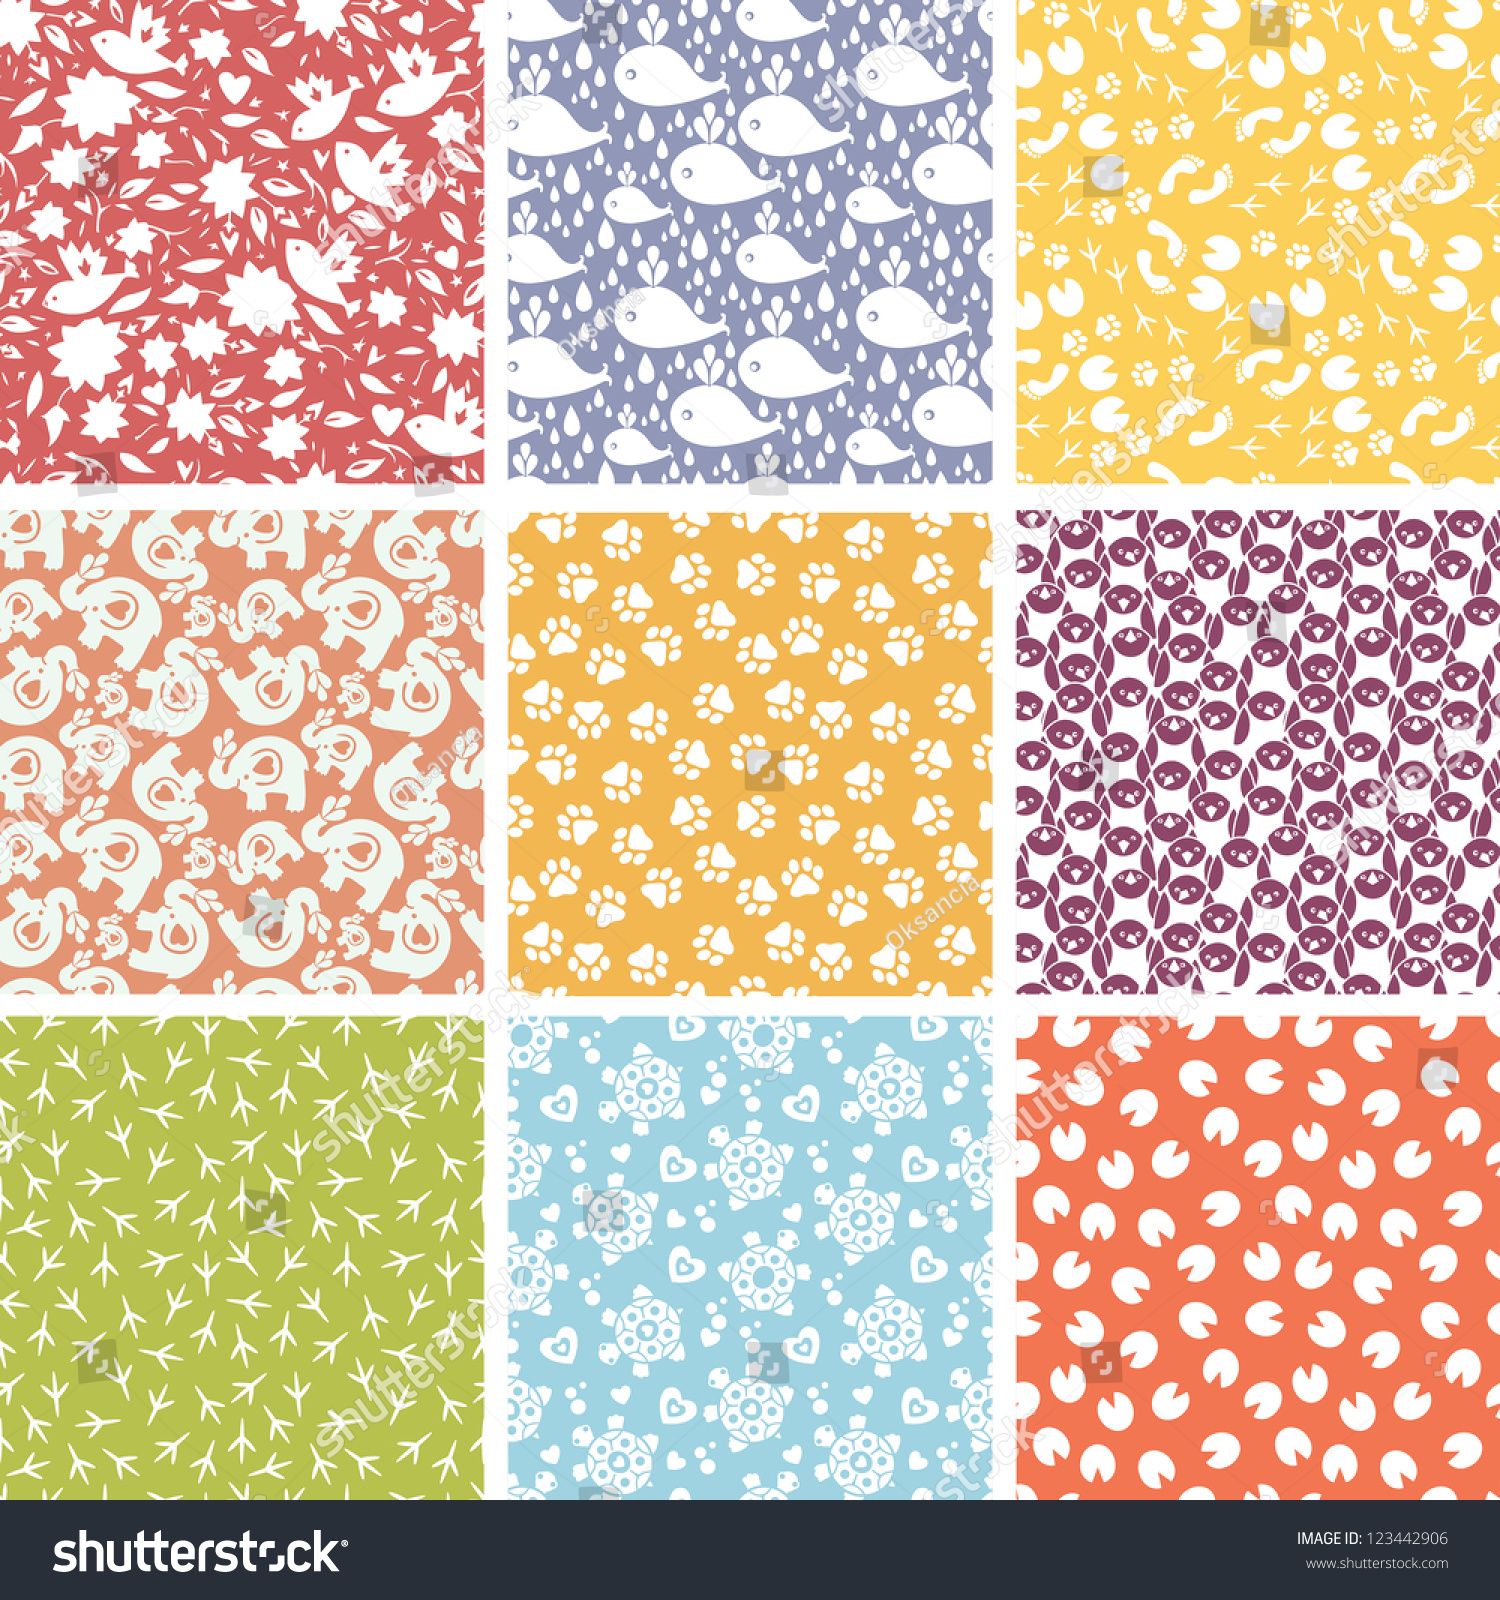 Set Of Nine Cute Elements Seamless Patterns Backgrounds With Hand Drawn ...